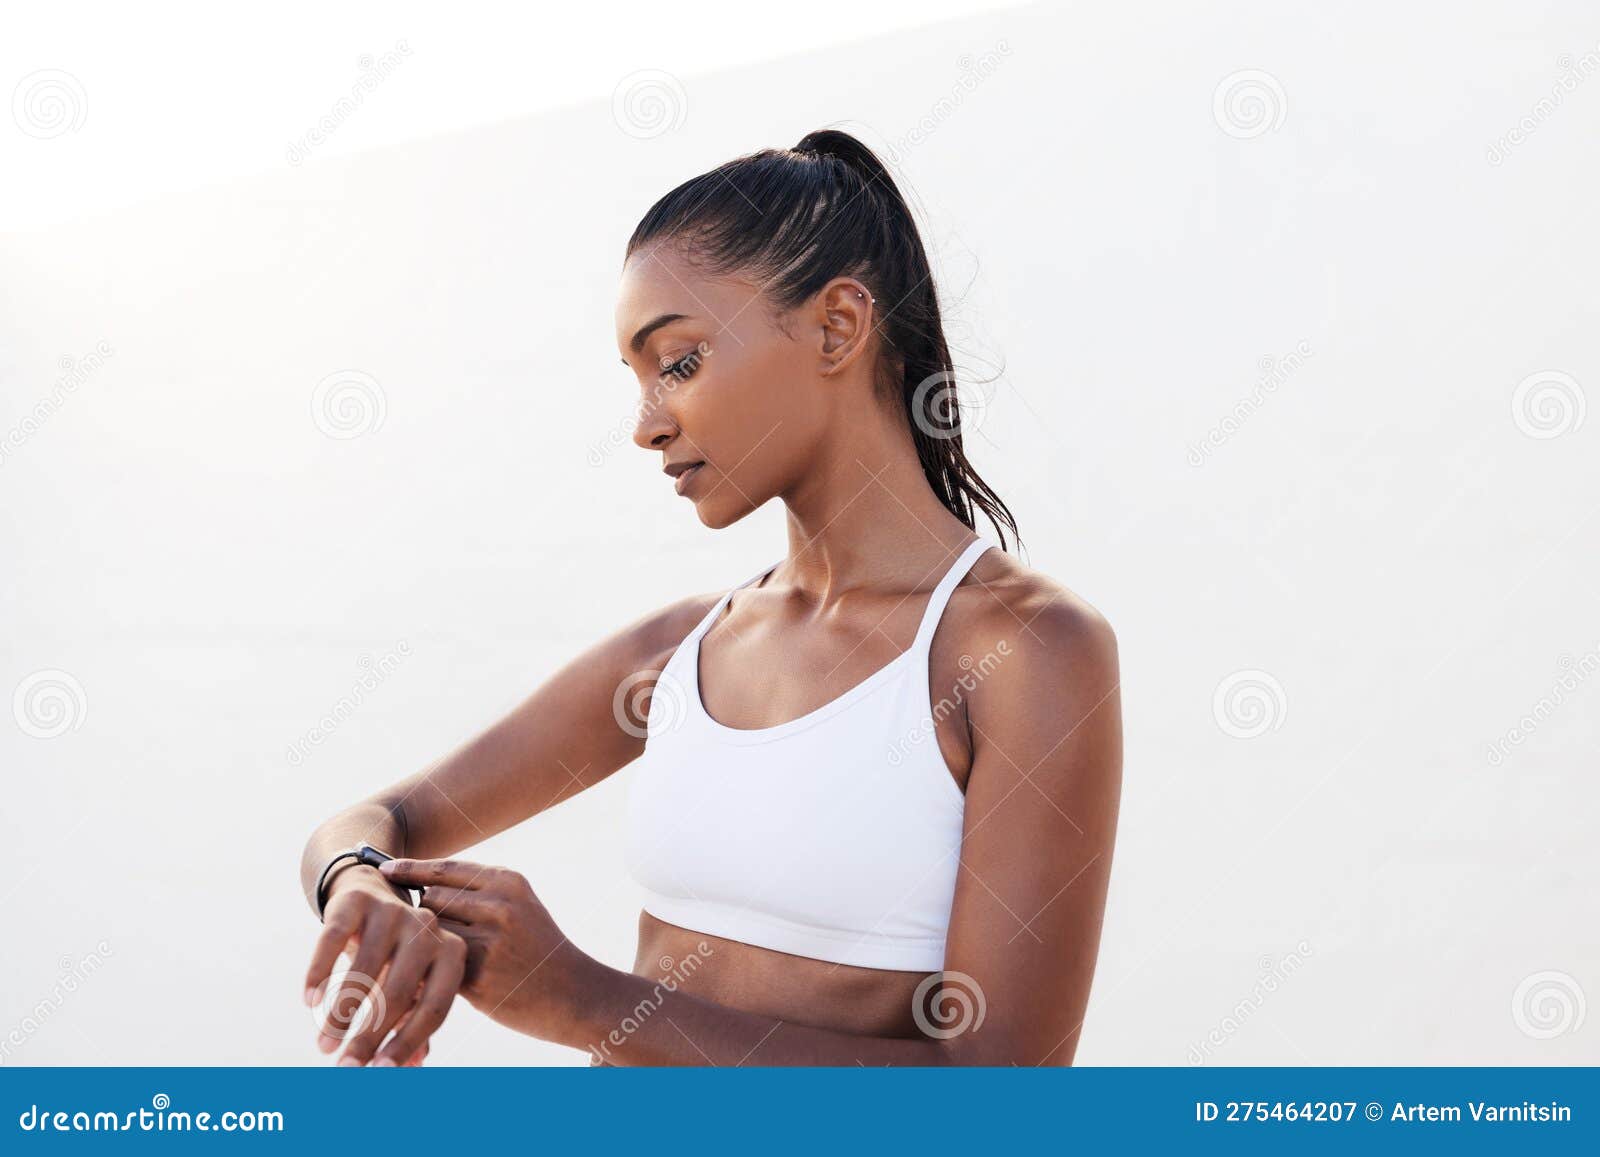 https://thumbs.dreamstime.com/z/fitness-female-white-sports-attire-adjusting-smartwatch-workout-woman-checking-heart-rate-training-fitness-275464207.jpg